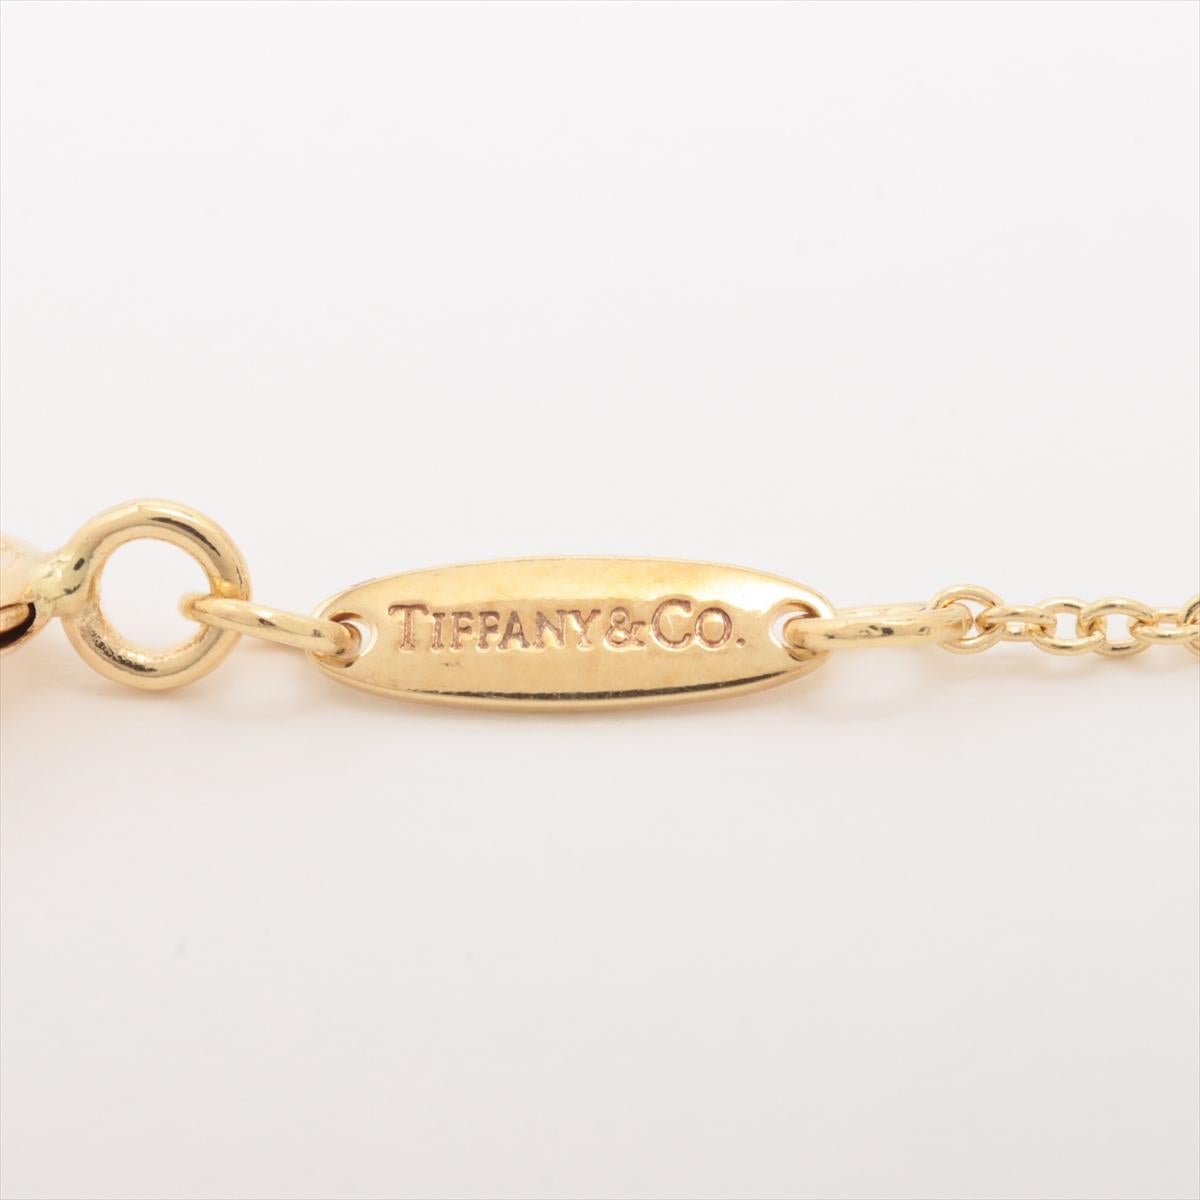 Brand : Tiffany 
Description: Tiffany Teardrop Necklace 
Metal Type: 750YG/Yellow Gold
Weight 5.0g
Condition: Preowned; small signs of wearing
Box -  Not Included
Papers - Included
